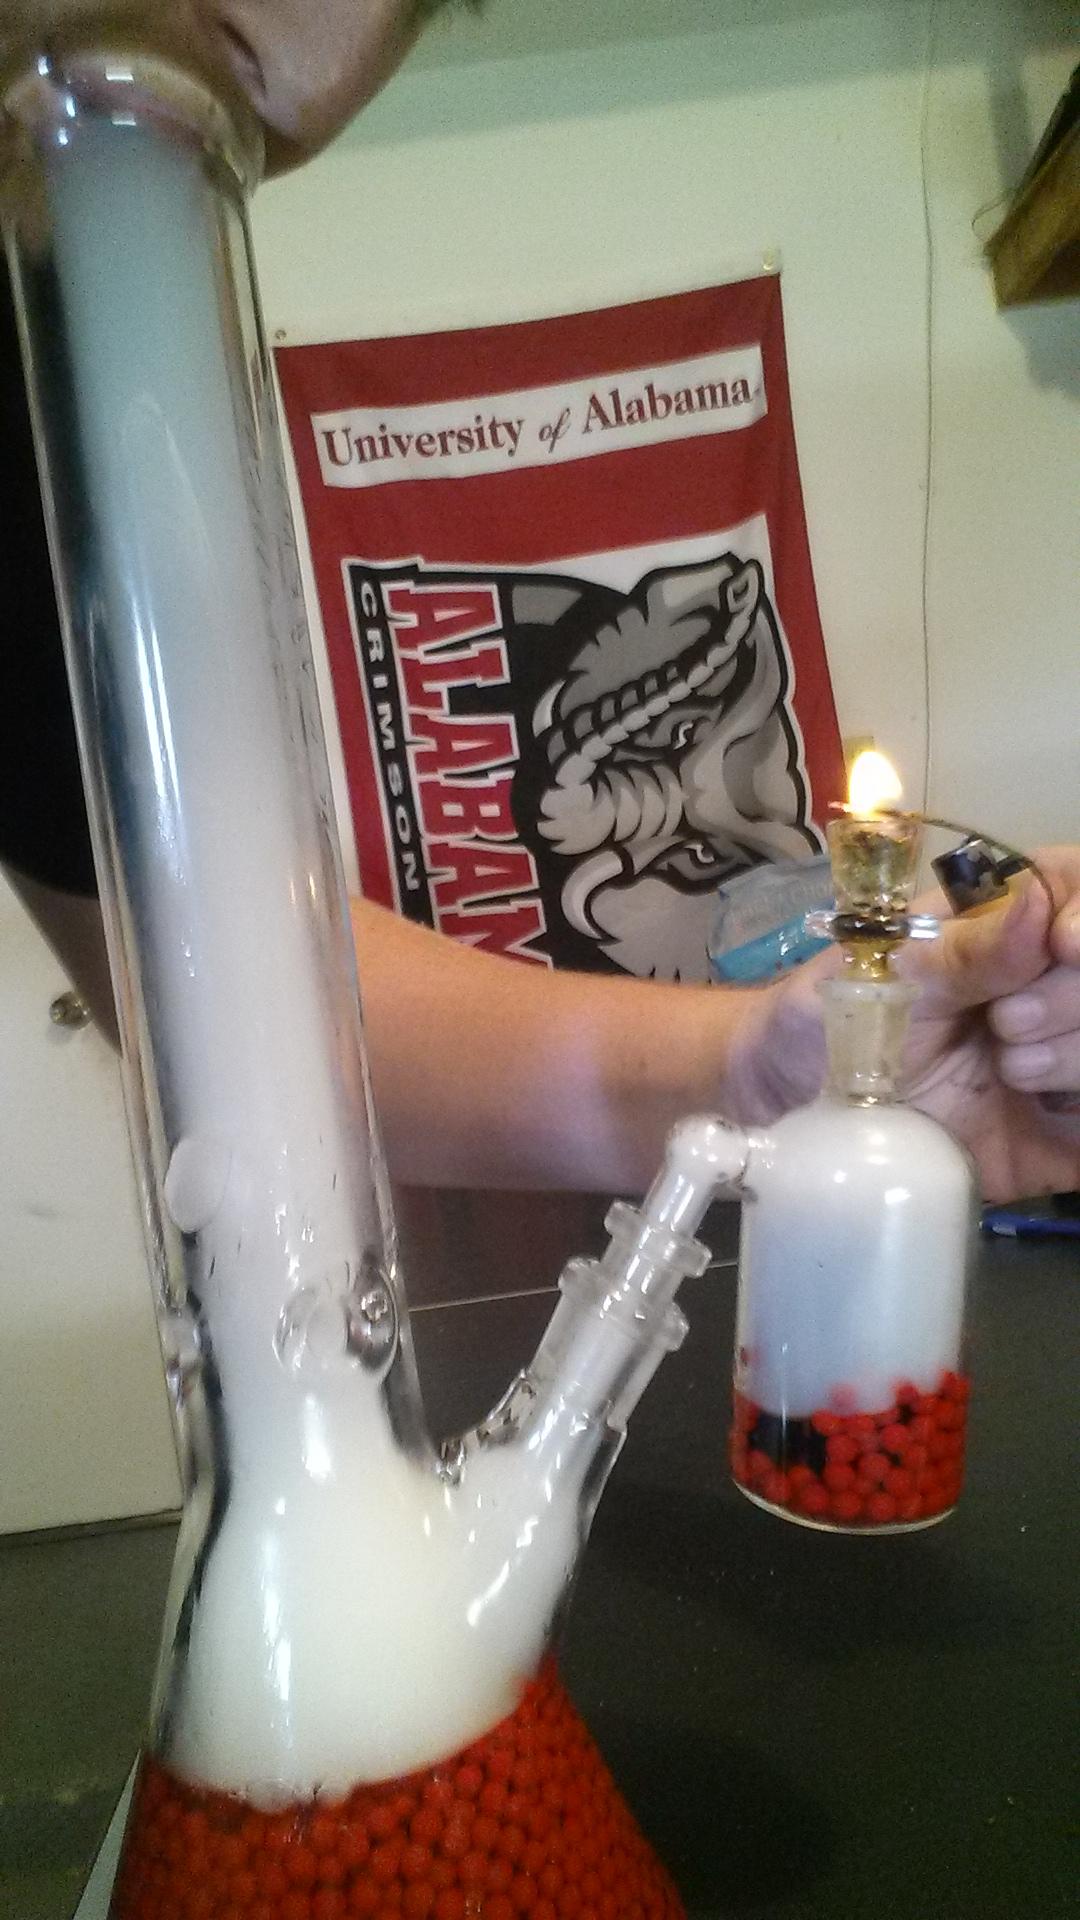 Epic Waterpipes